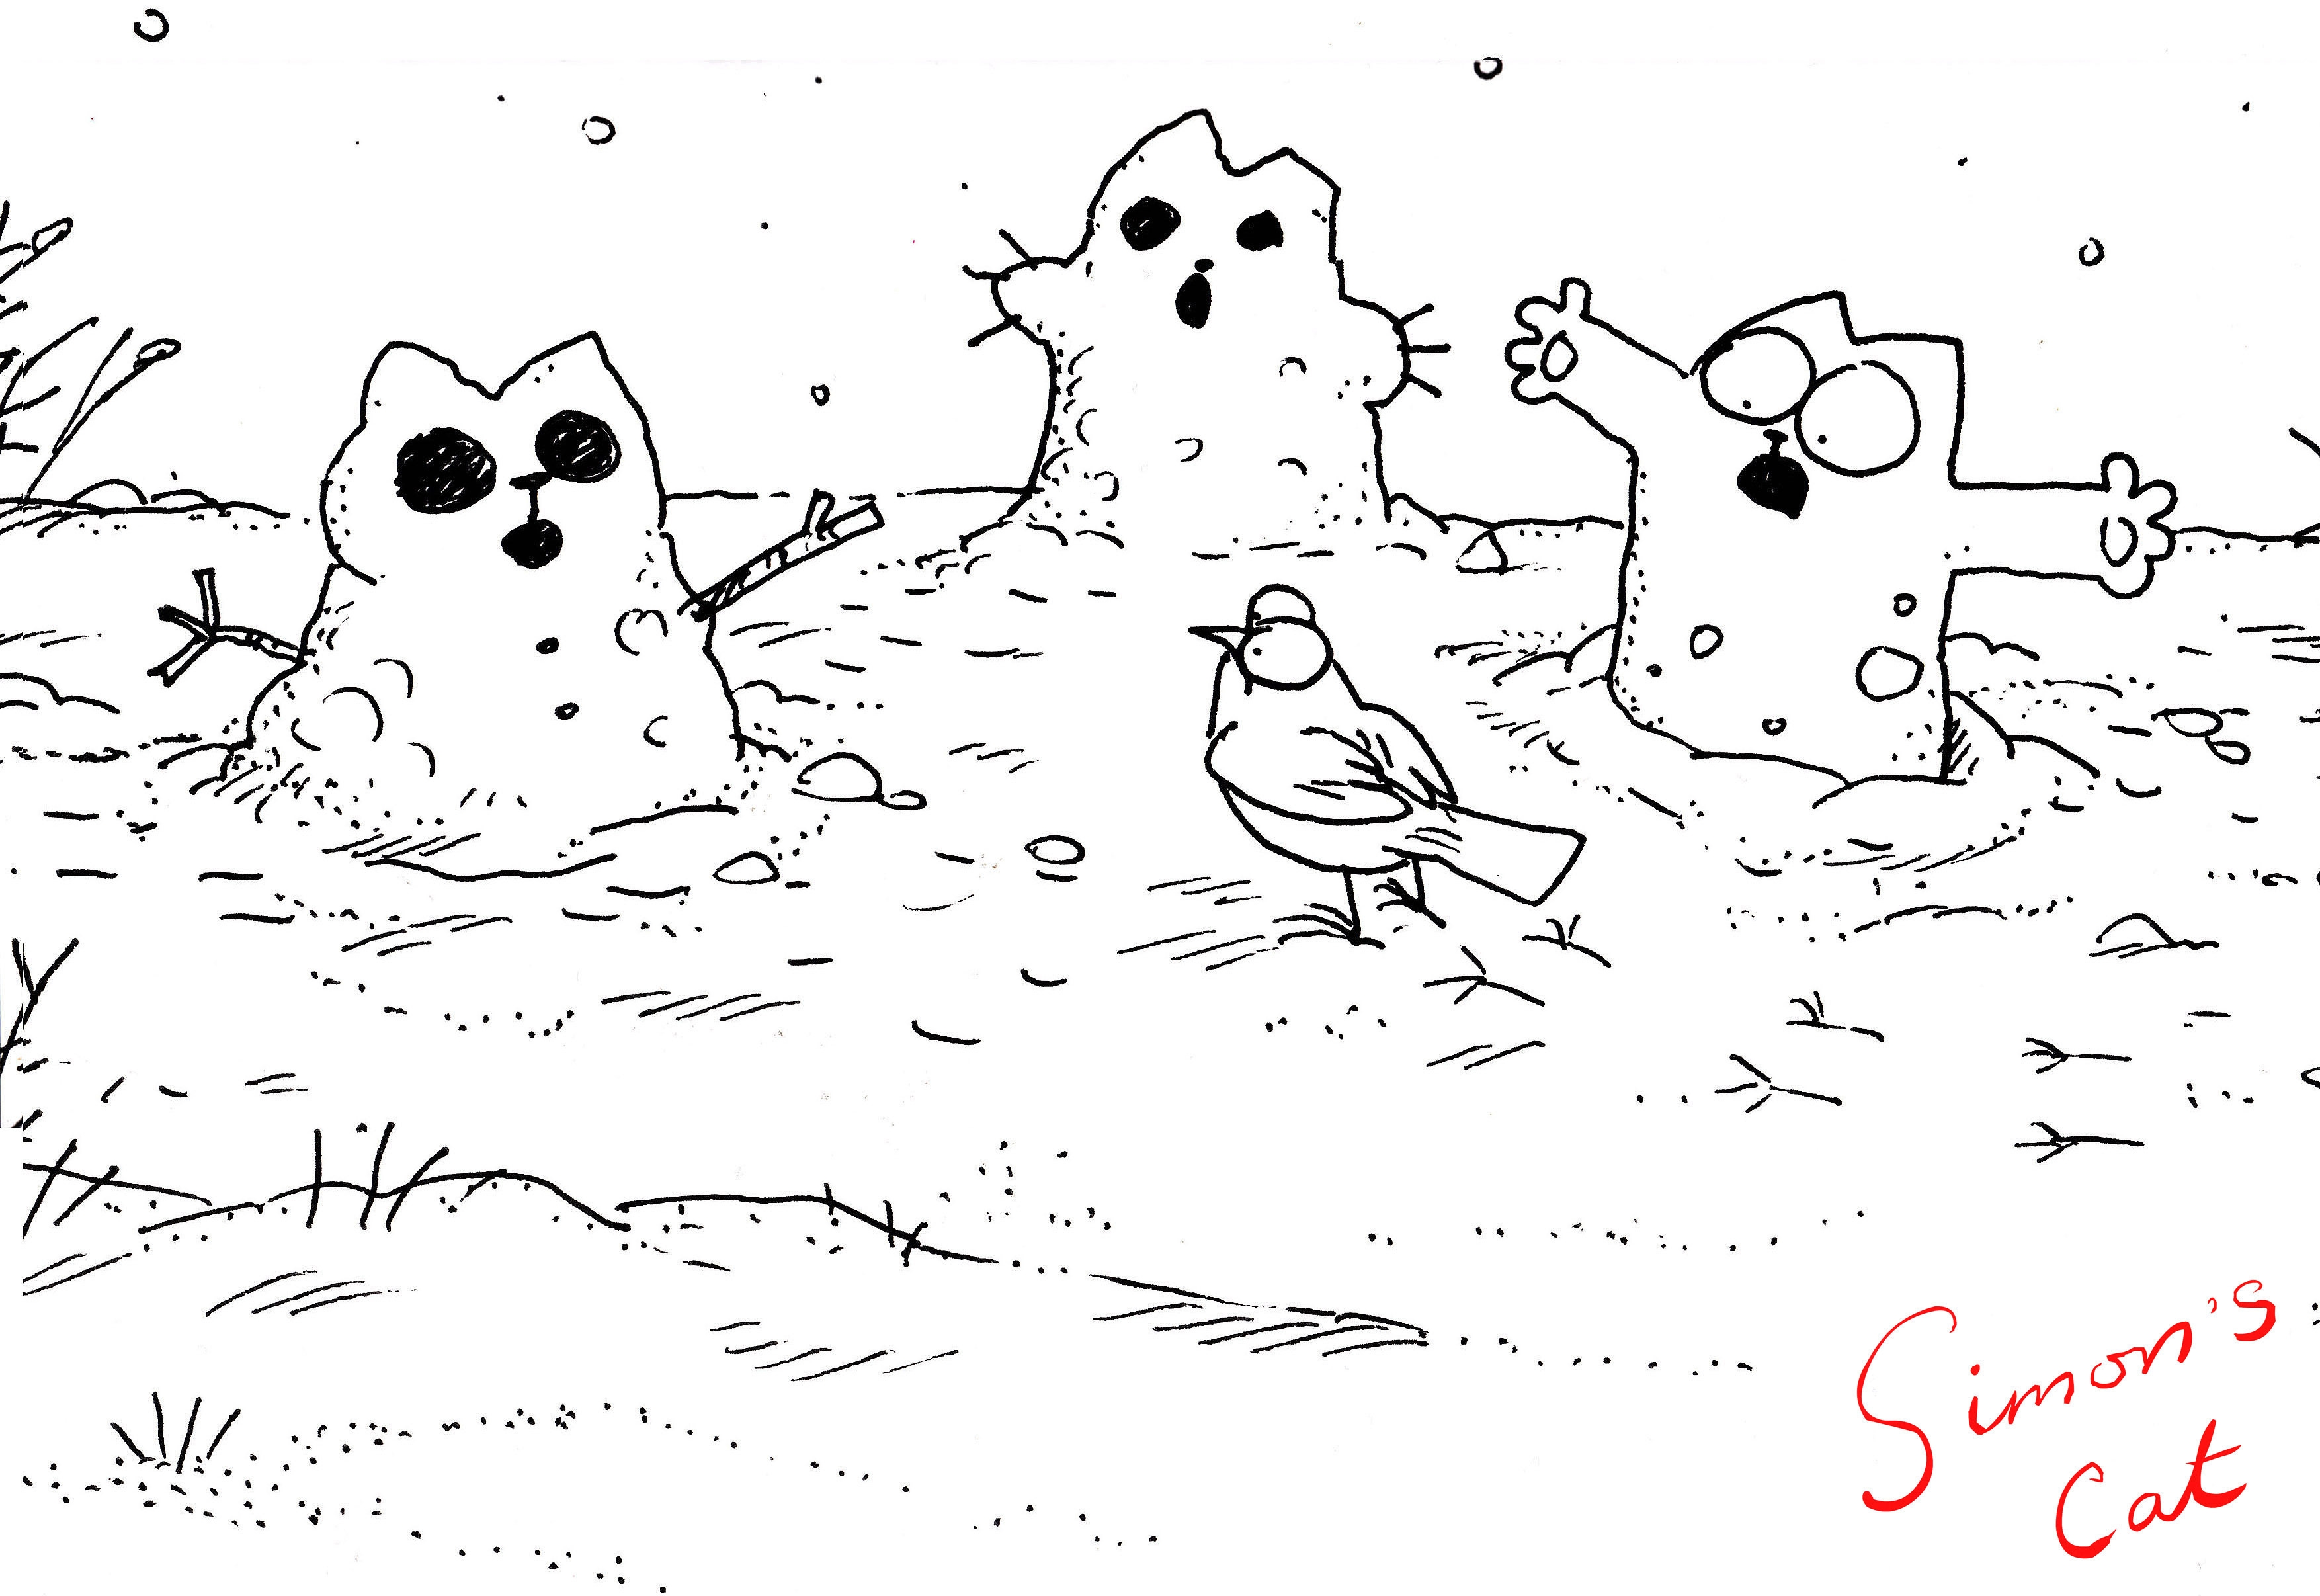 Popular Simon's Cat images for mobile phone